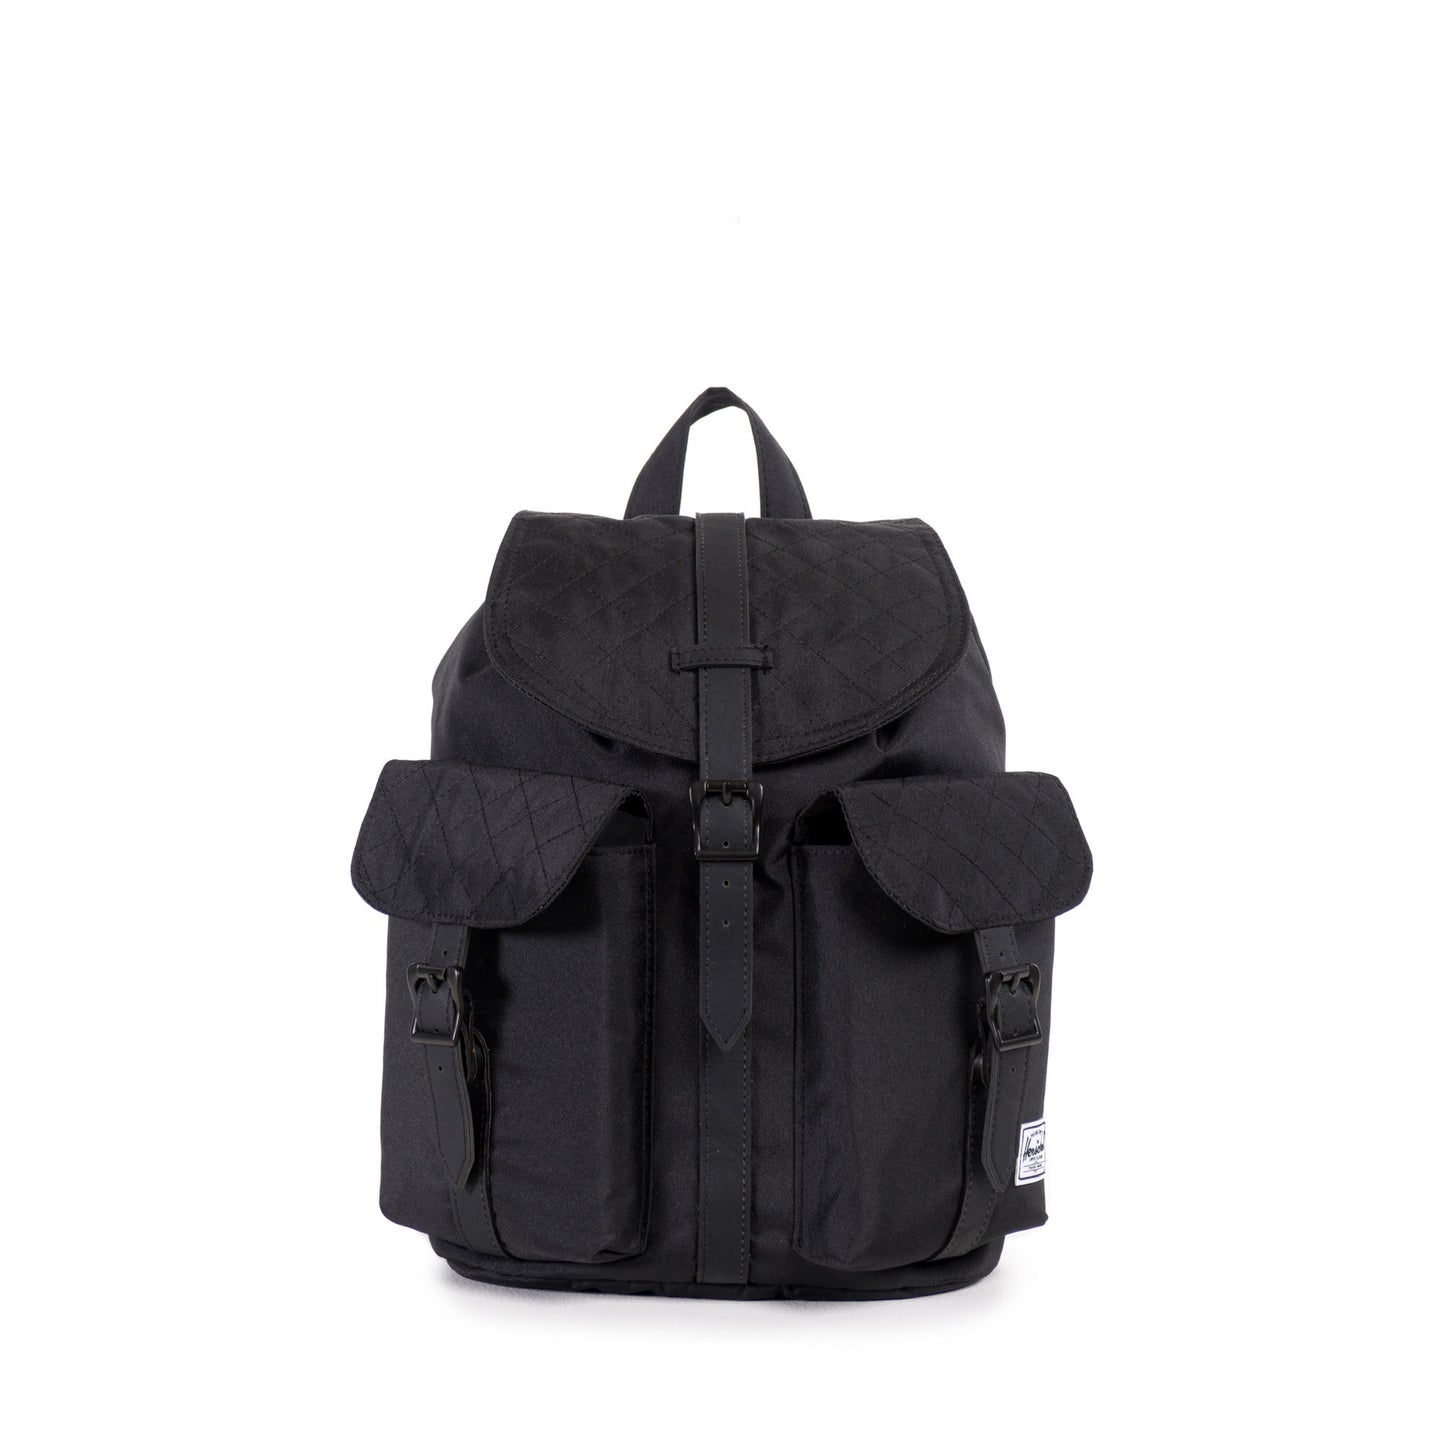 Herschel Supply Co. - Dawson Mid-Volume Backpack, Black Quilted - The Giant Peach